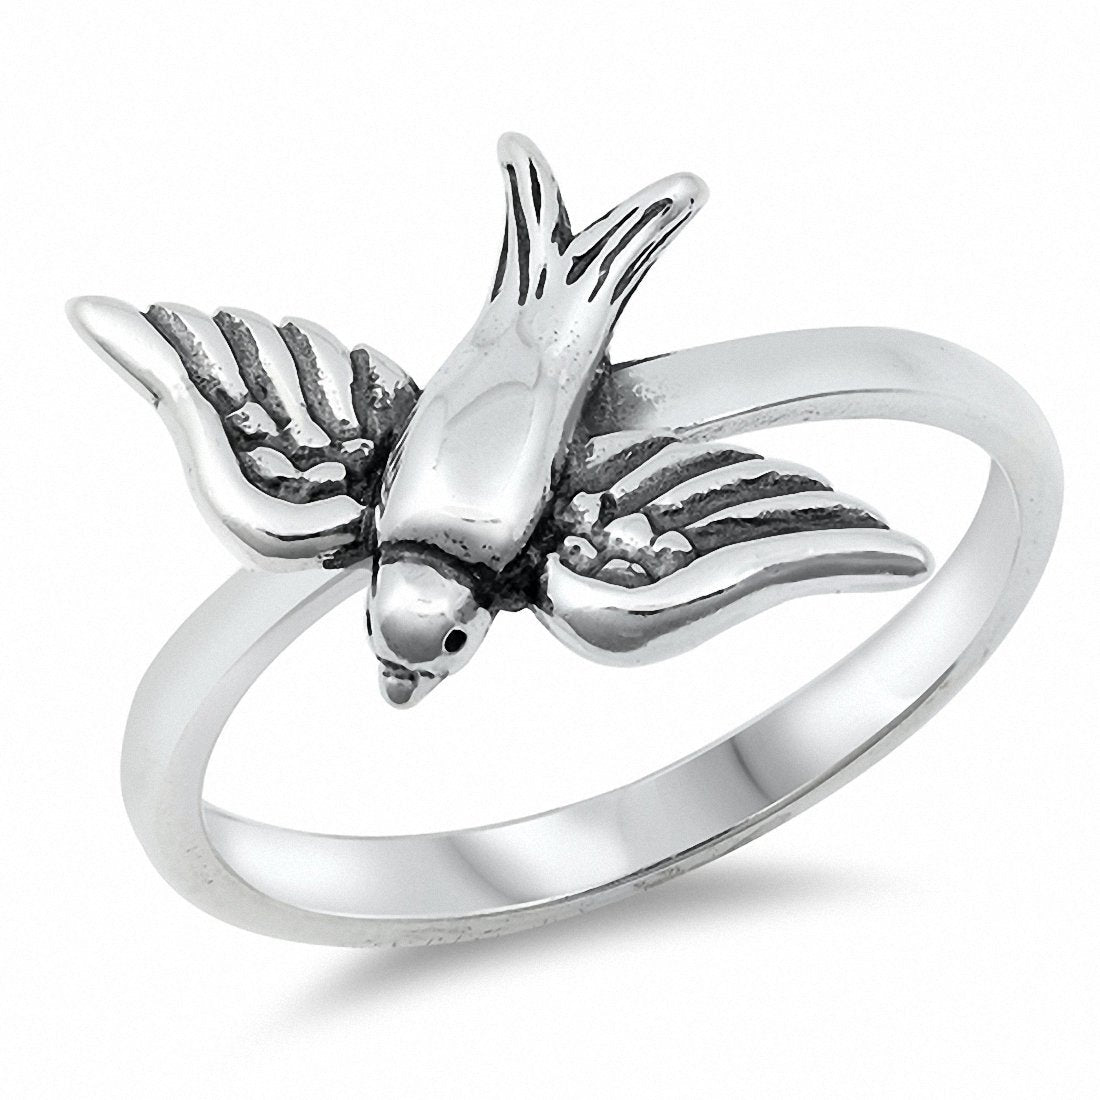 Sparrow Band Plain Ring 925 Sterling Silver